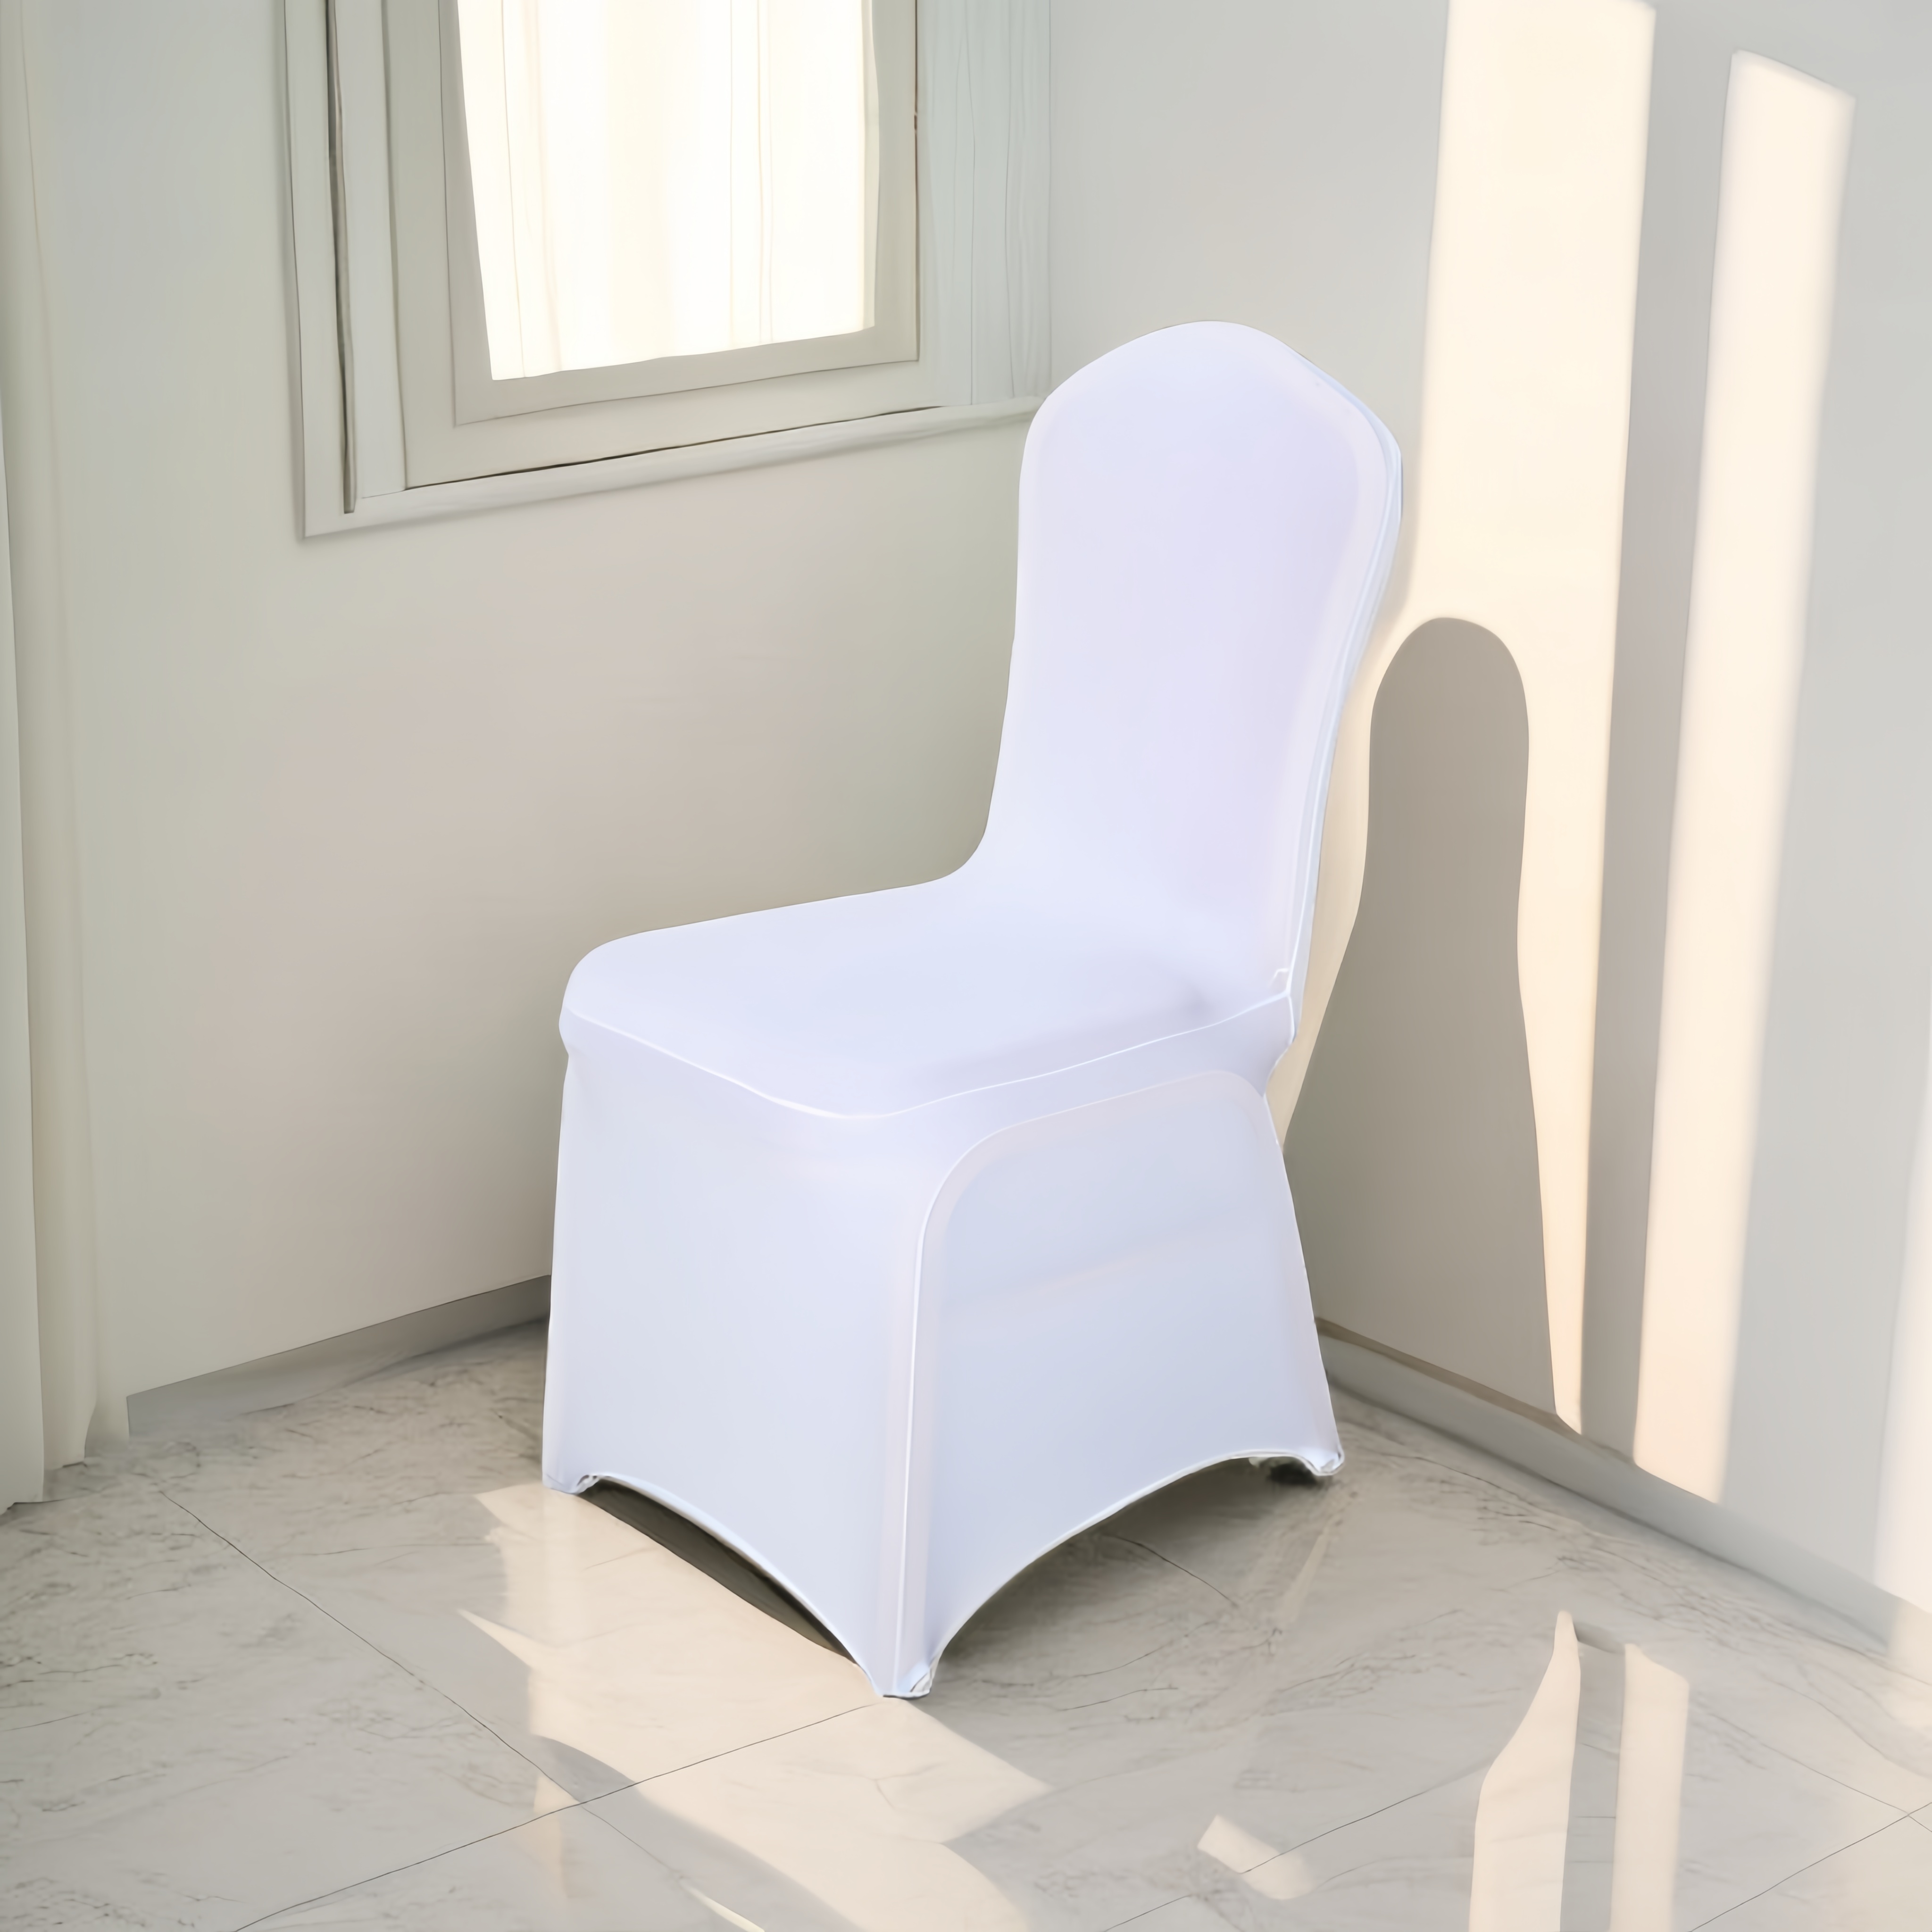 Stretch Rectangular Chair Covers Spandex Folding Chair Cover